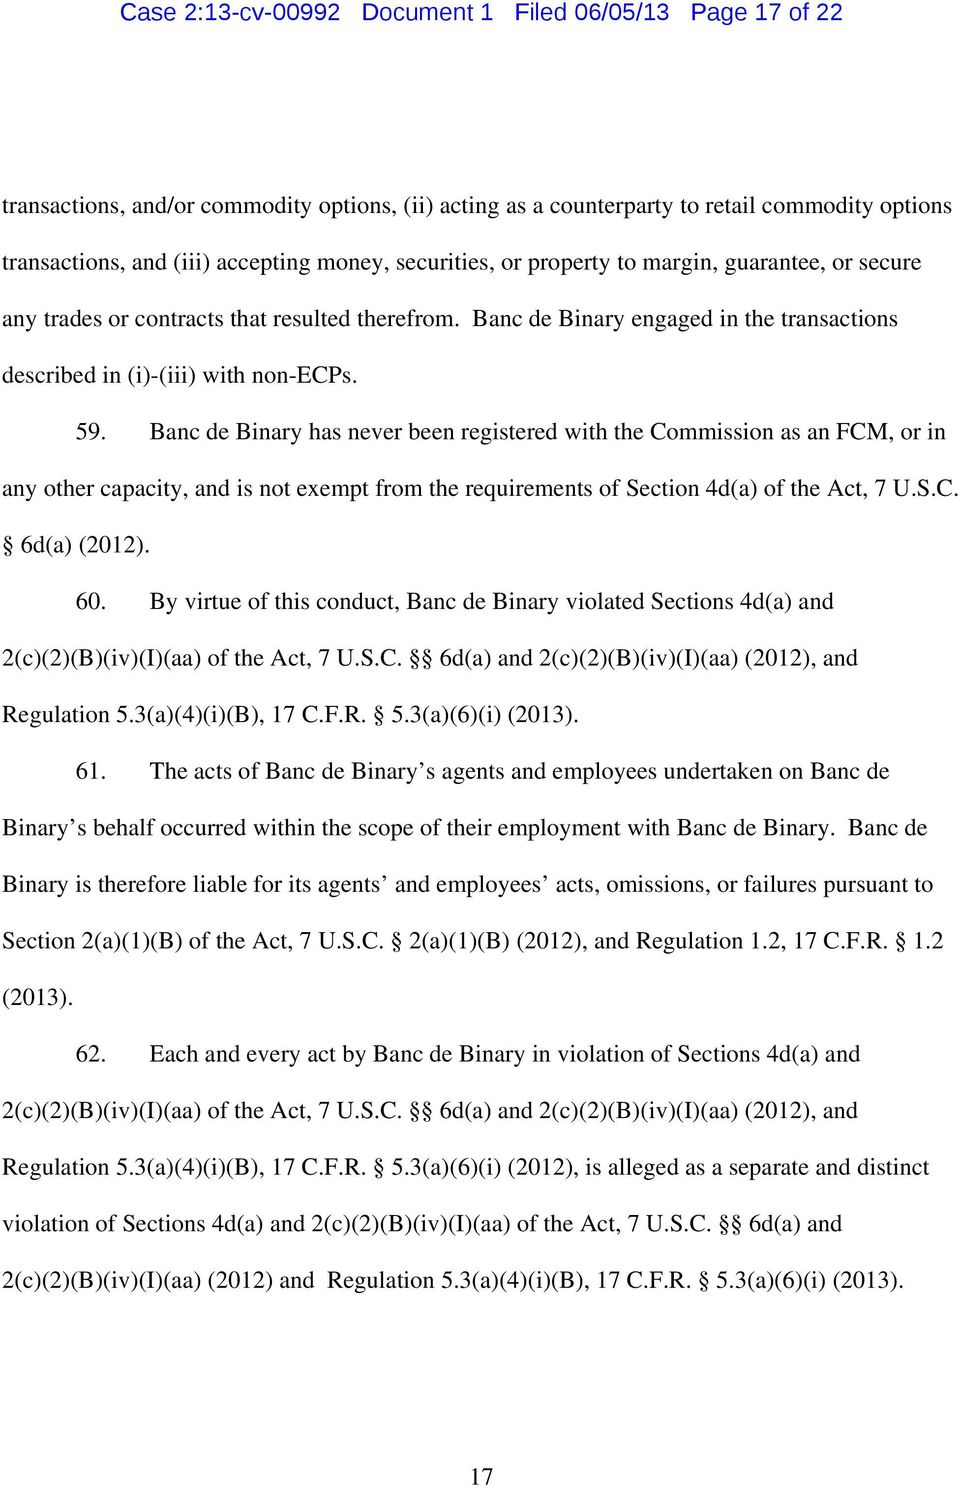 Banc de Binary has never been registered with the Commission as an FCM, or in any other capacity, and is not exempt from the requirements of Section 4d(a of the Act, 7 U.S.C. 6d(a (2012. 60.